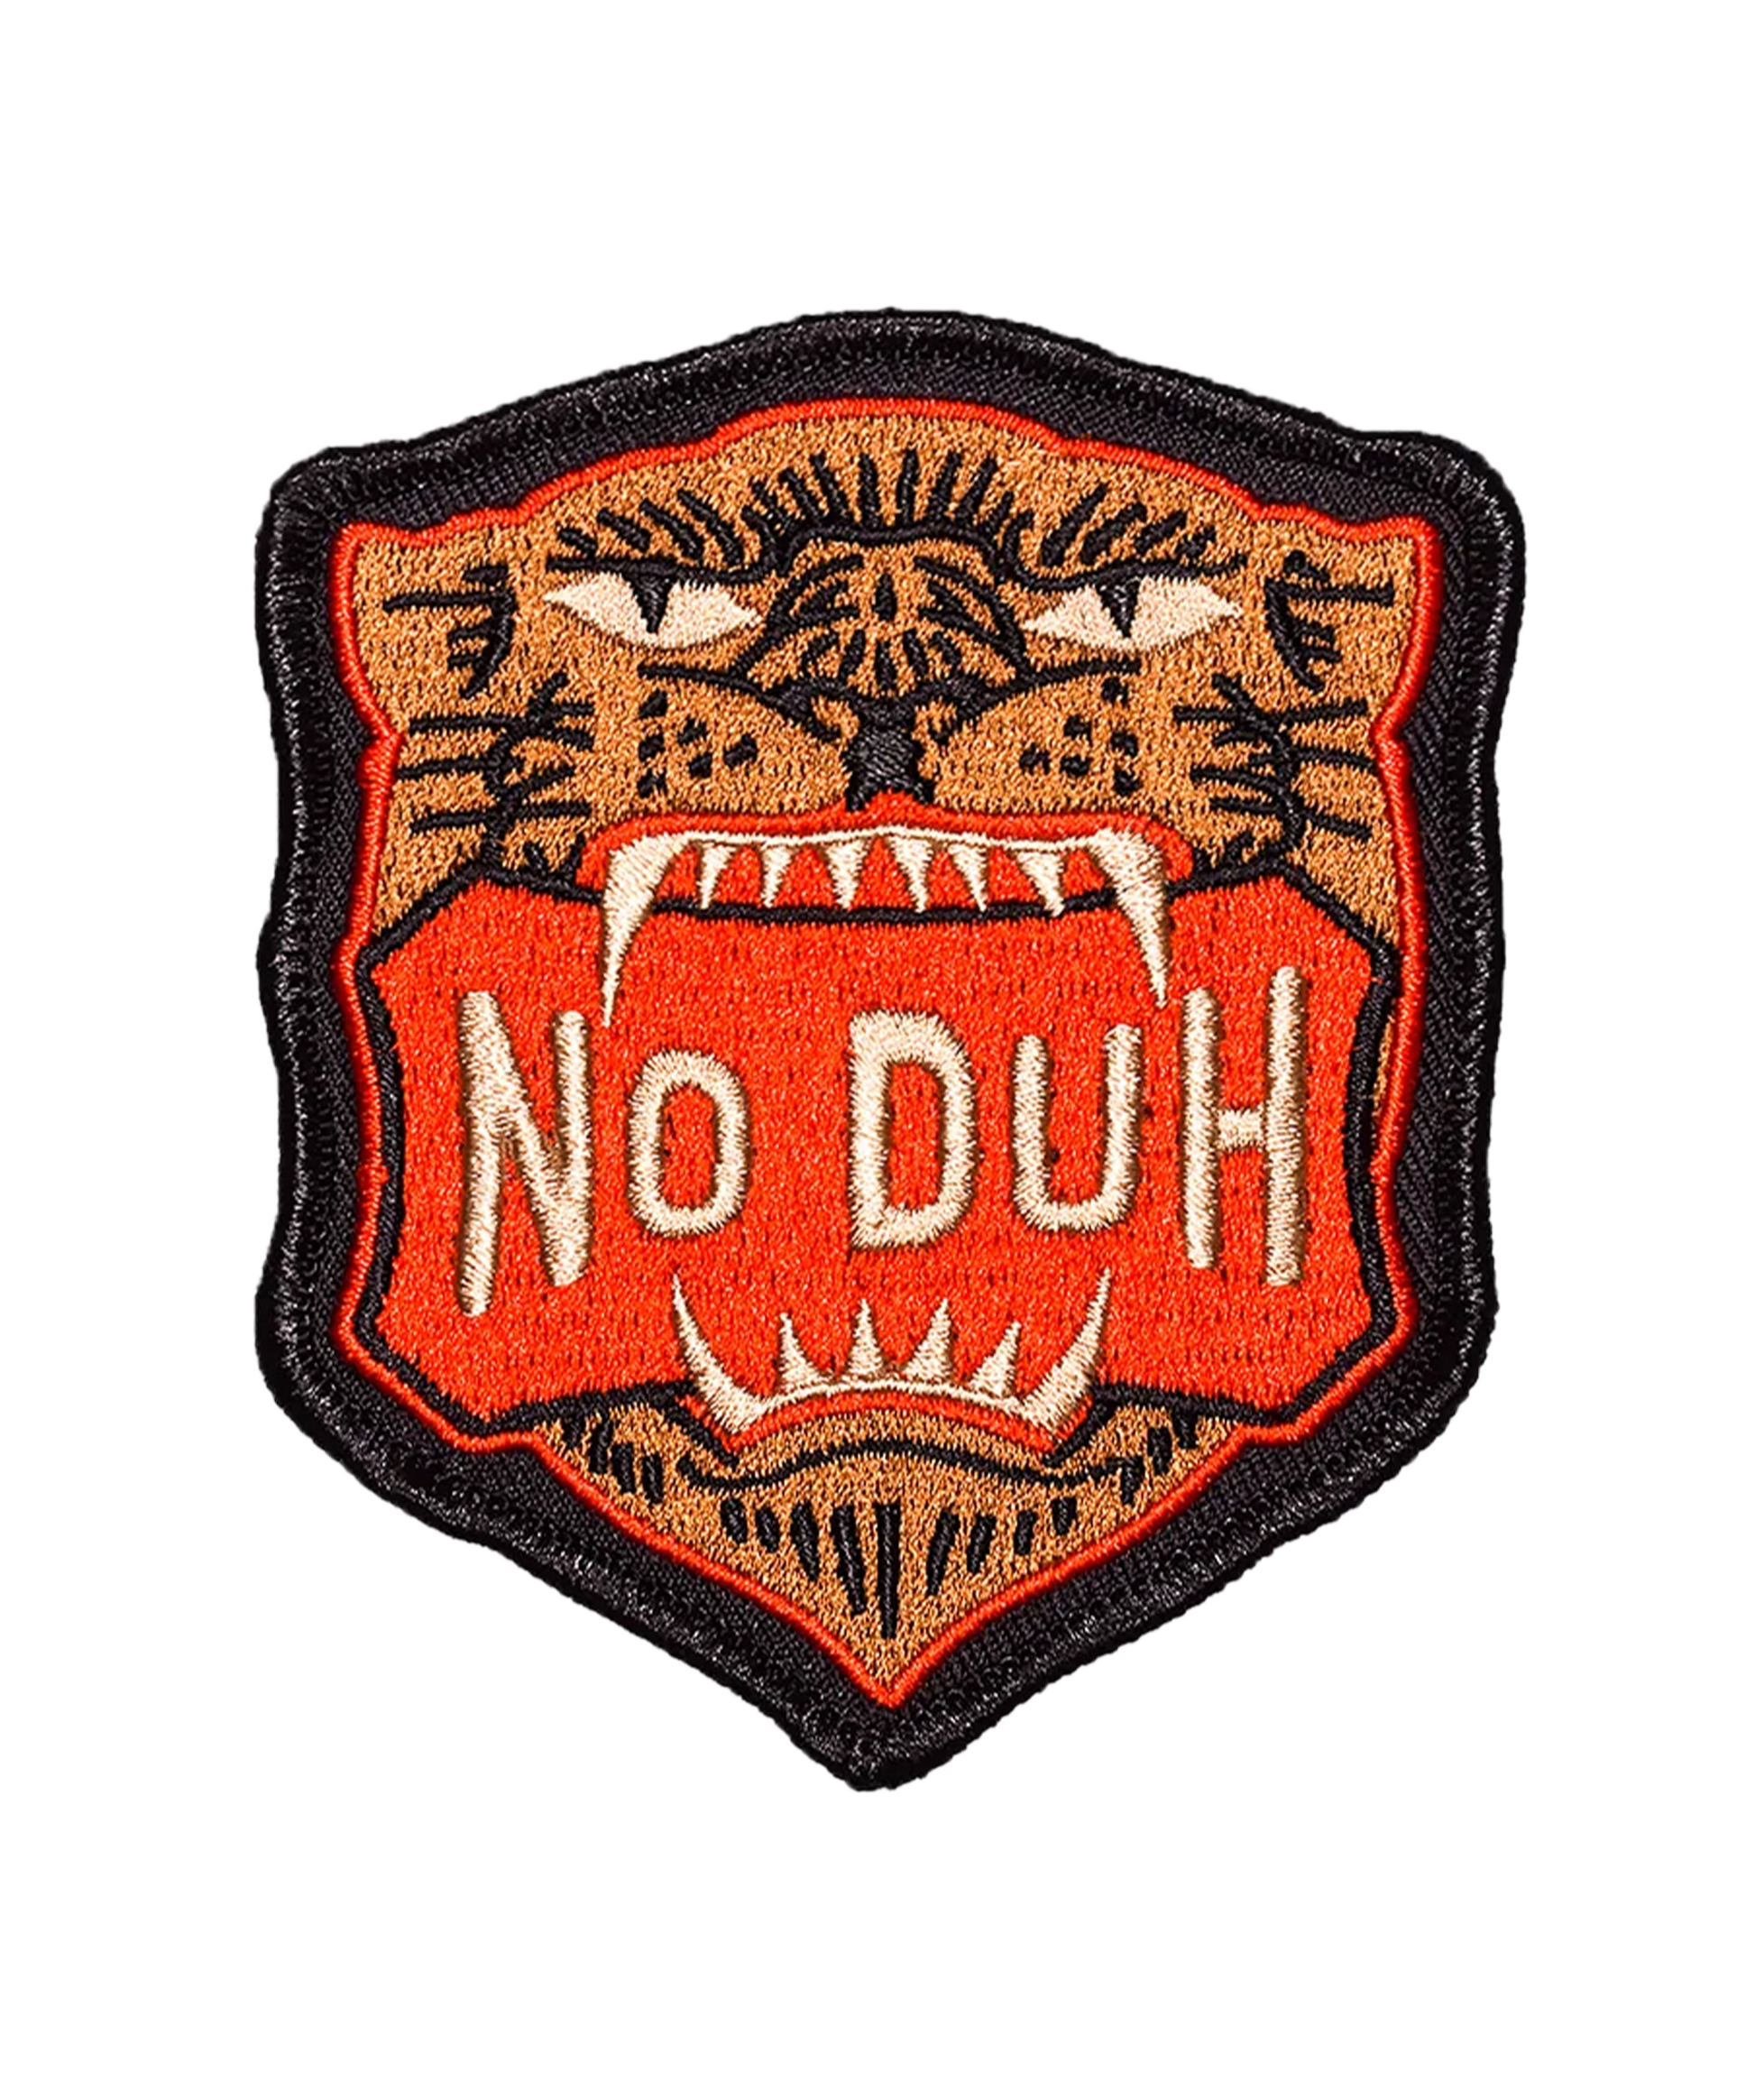 No Backing (Sew On) Embroidered Patches  Pins, Buttons & Patches 